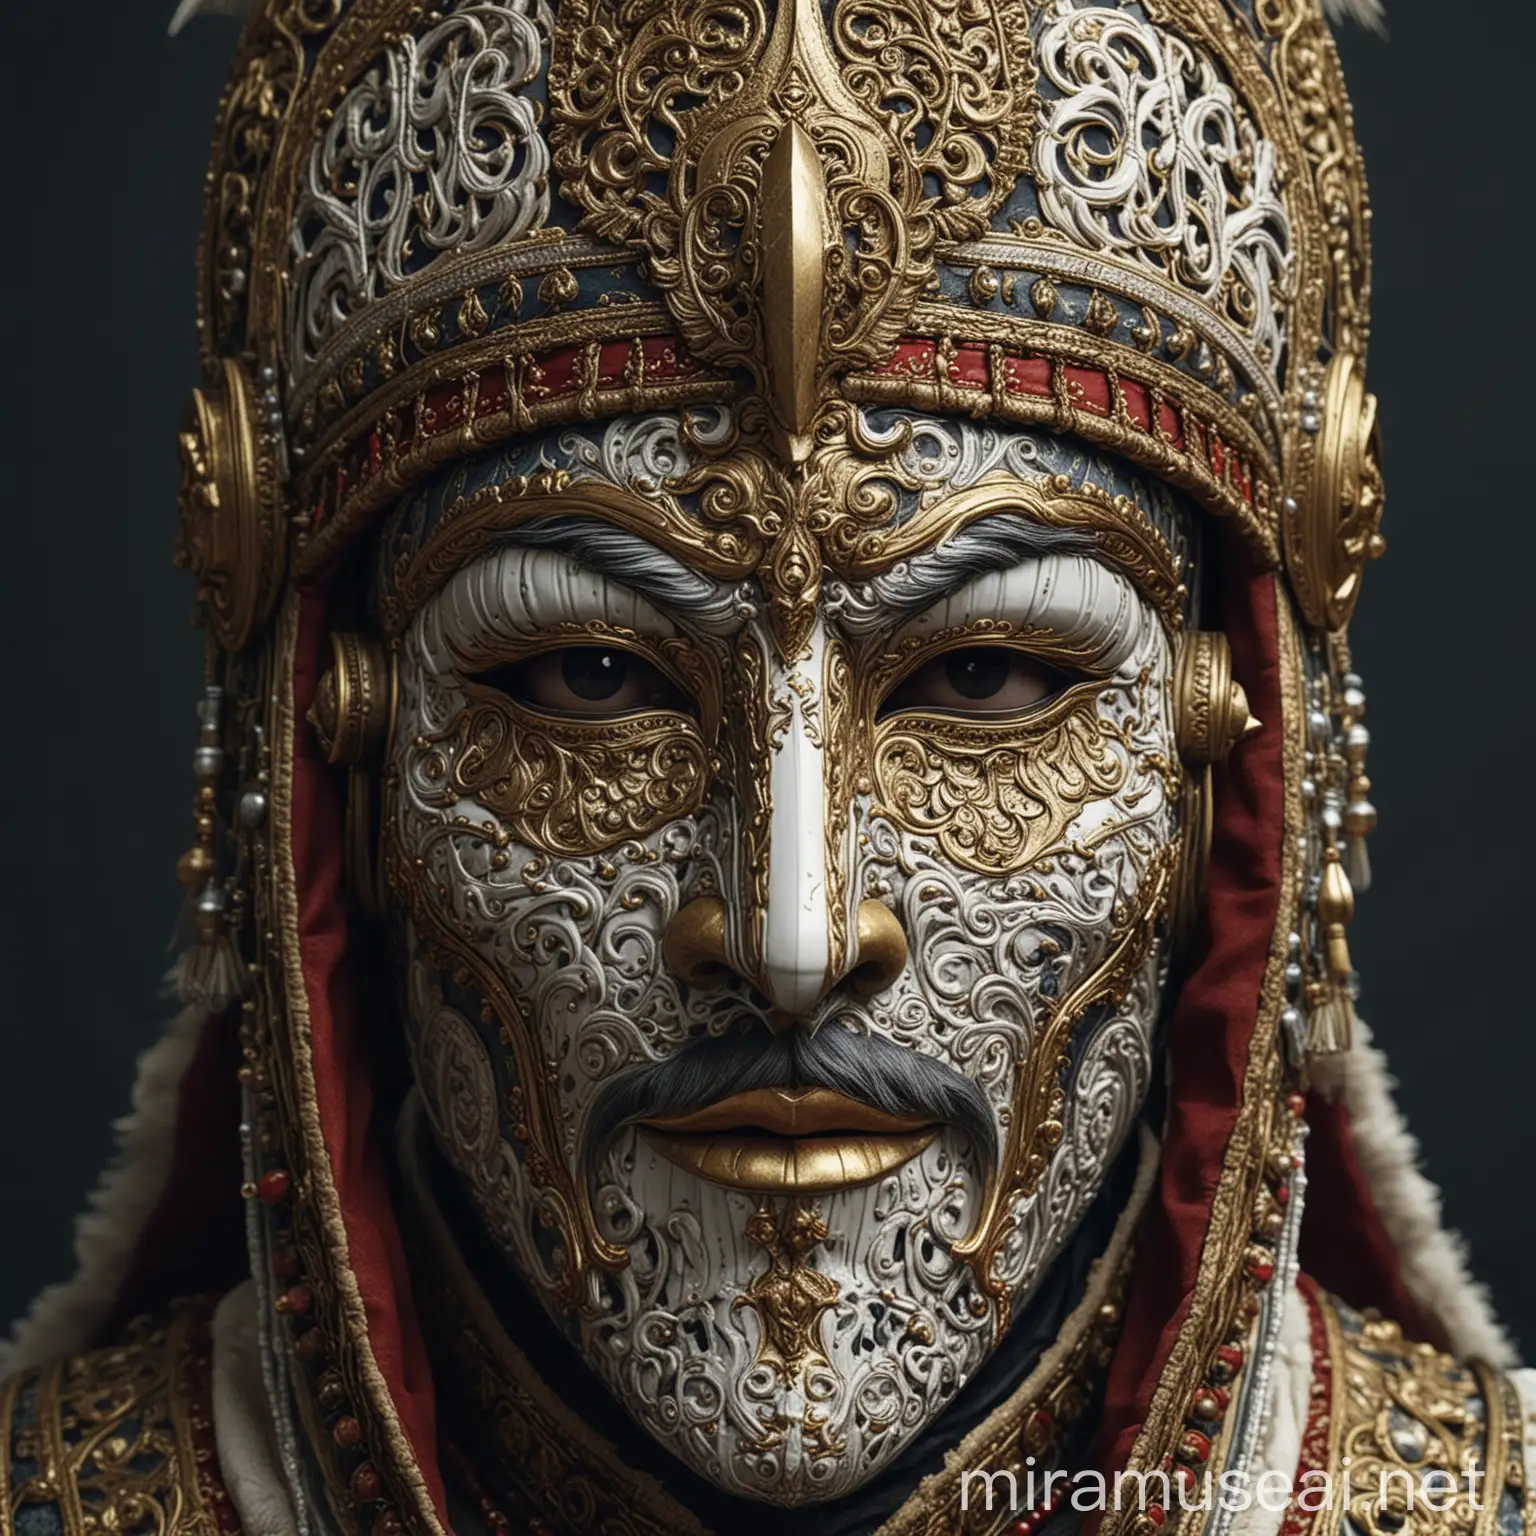 Intricately Detailed Janissary Mask with Sharp Lines